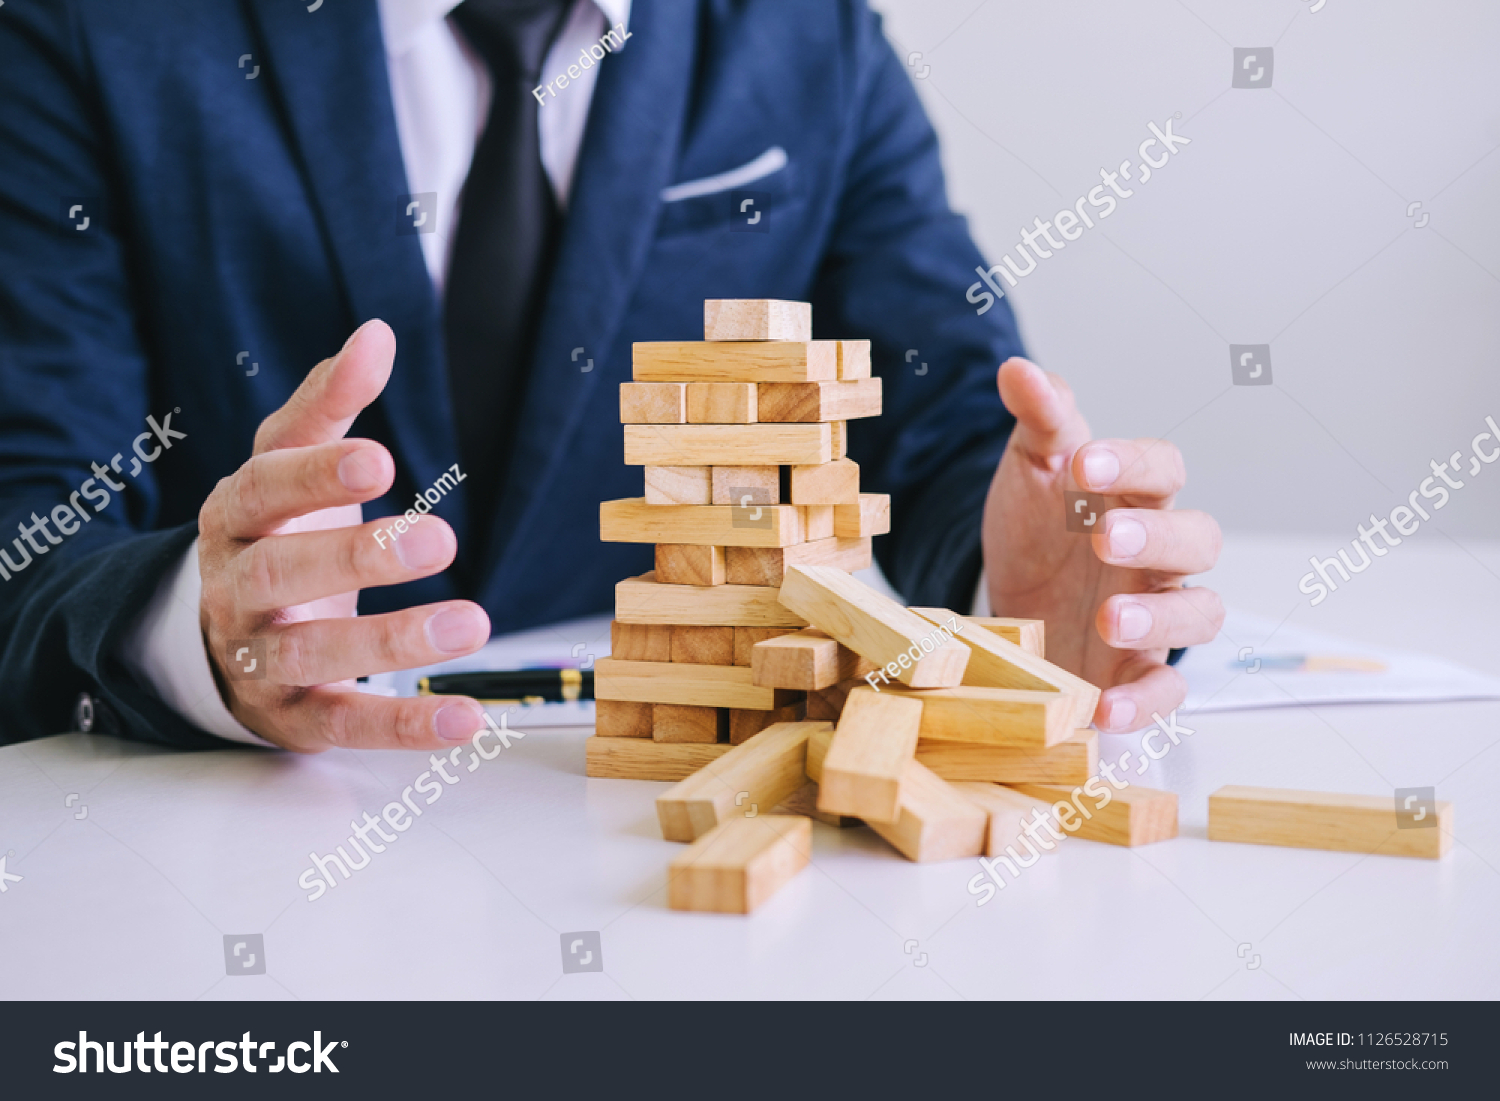 Alternative risk concept, plan and strategy in business protect with balance wooden stack with hand control risk shape. #1126528715